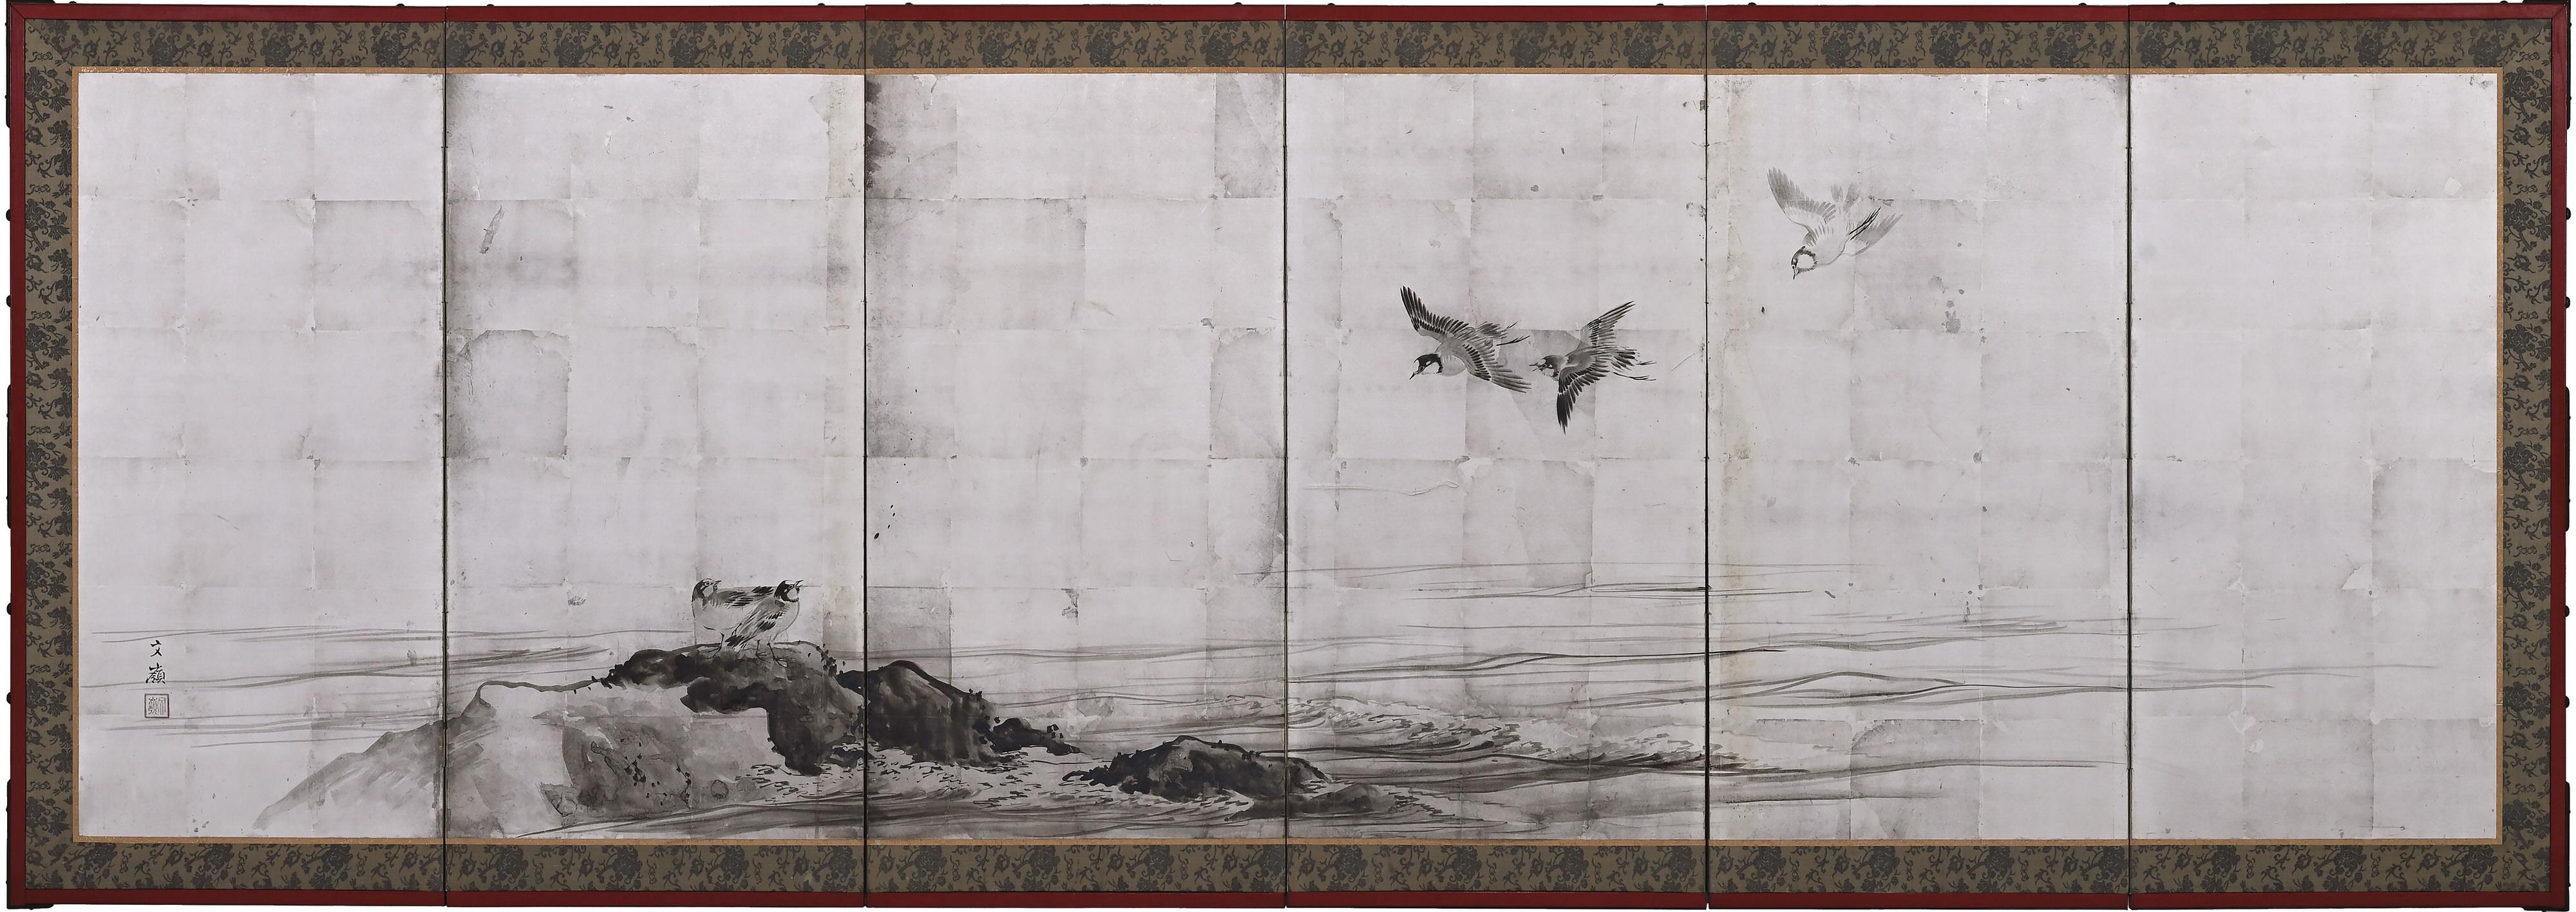 Heron & Plovers

Ink and silver leaf on paper

Maekawa Bunrei (1837-1917)

A pair of low six-panel Japanese screens by Maekawa Bunrei, a later master of the Kyoto based Shijo school of painting. On the right screen a solitary white heron stands